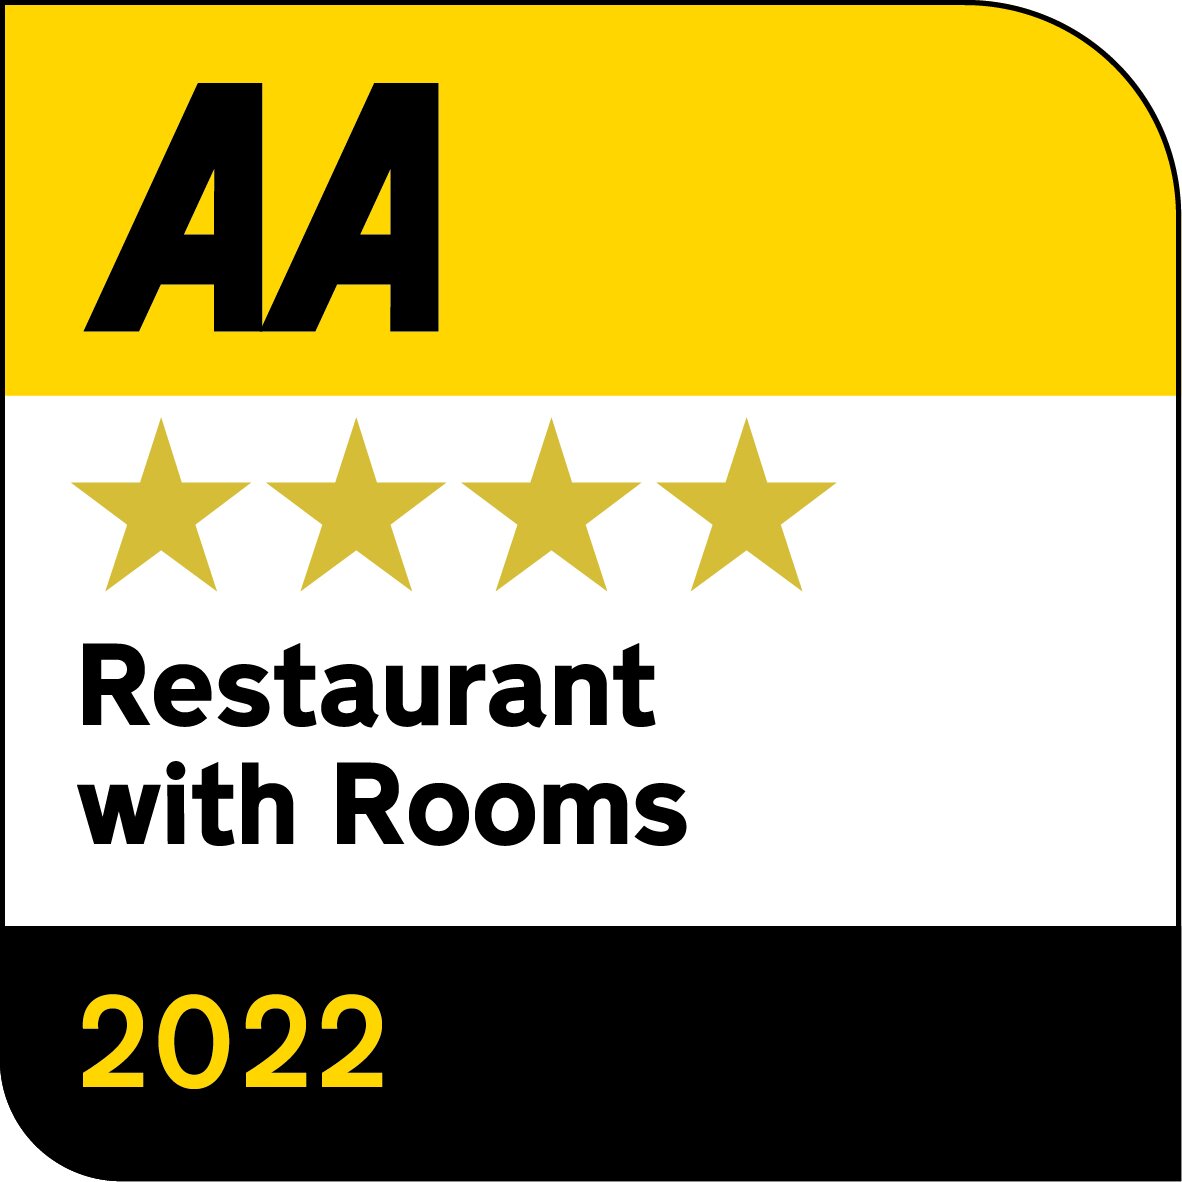 AA Four Star Restaurant with Rooms